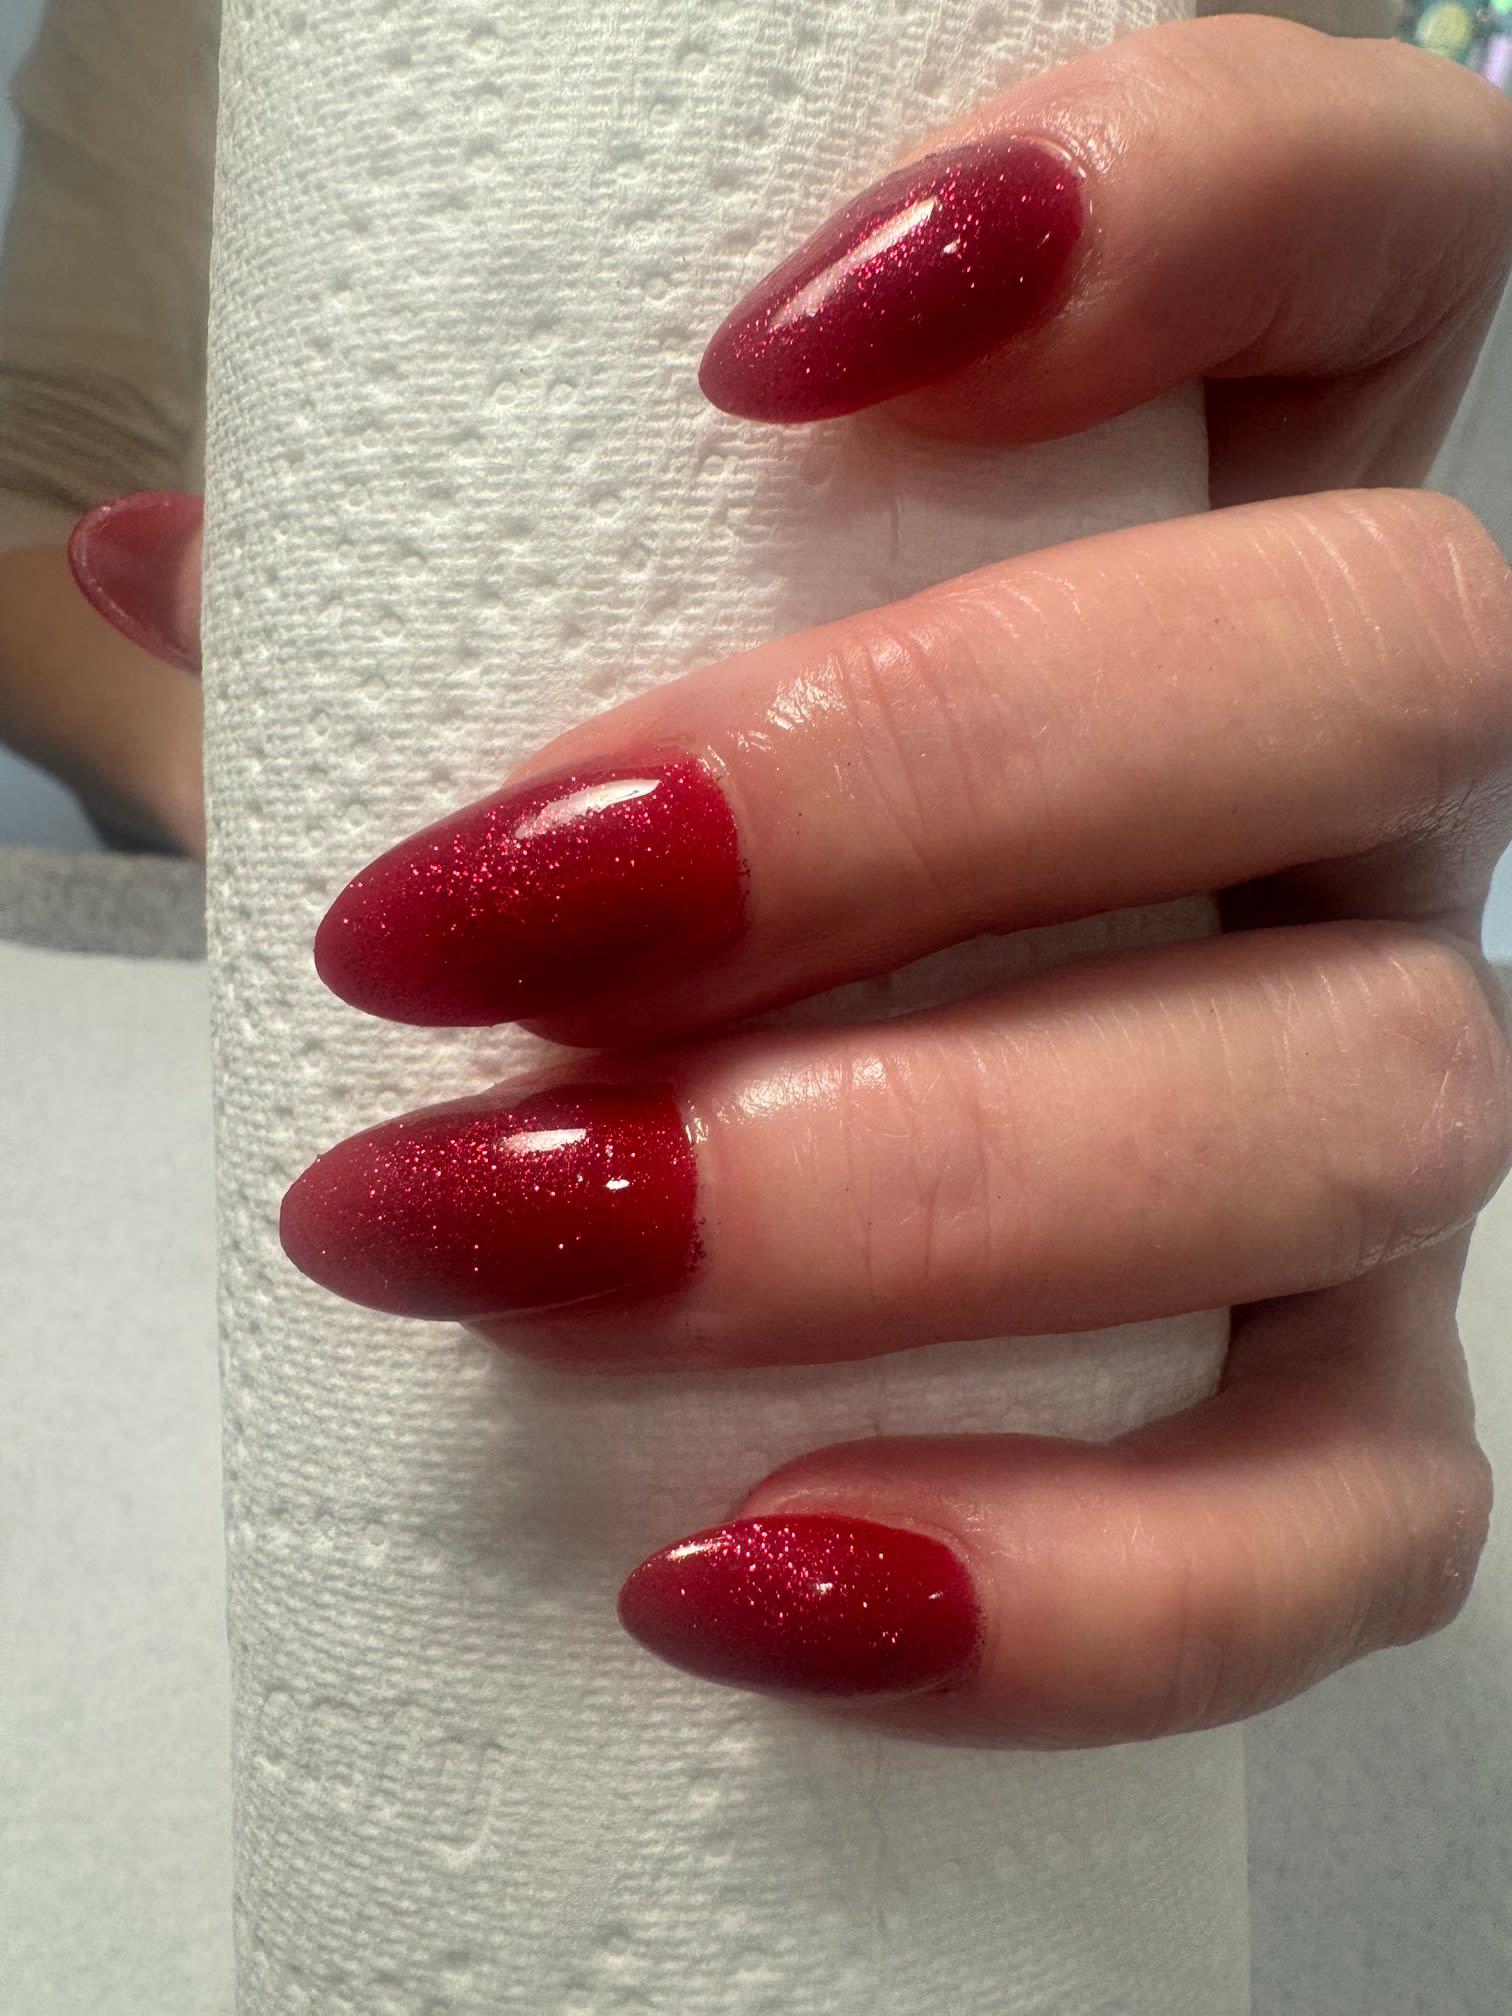 Tayne Nails And Beauty Bridgwater 07775 885300